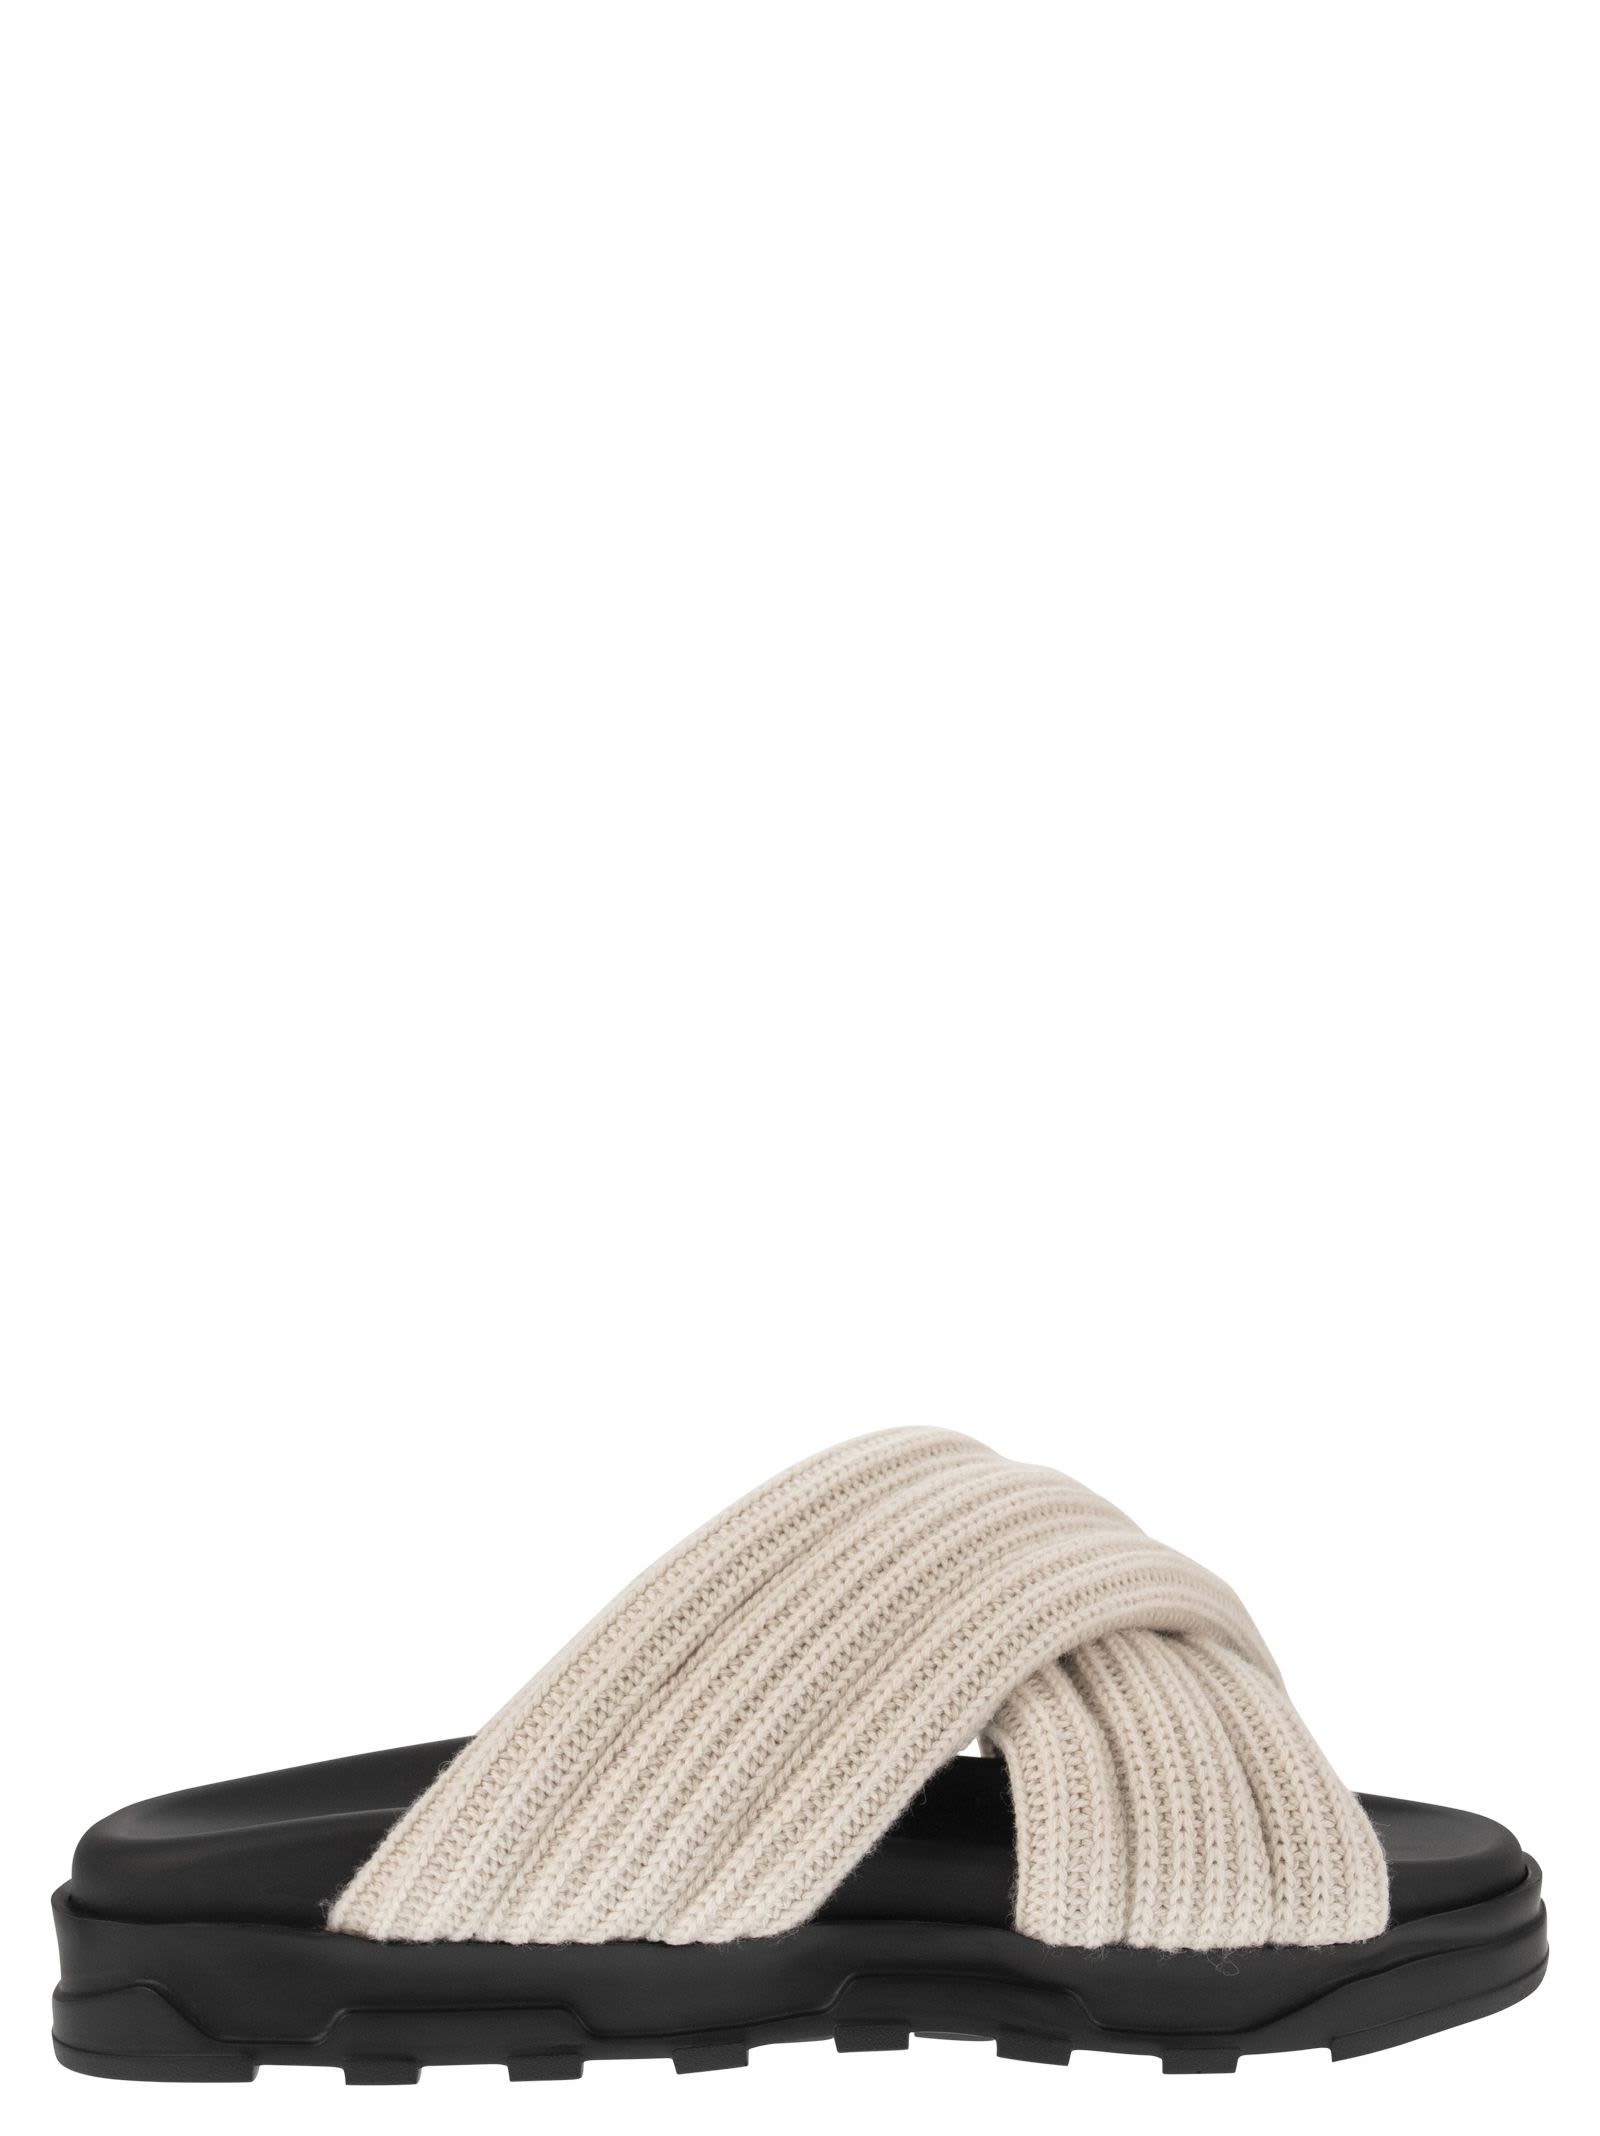 Sandal With Merino Wool Bands